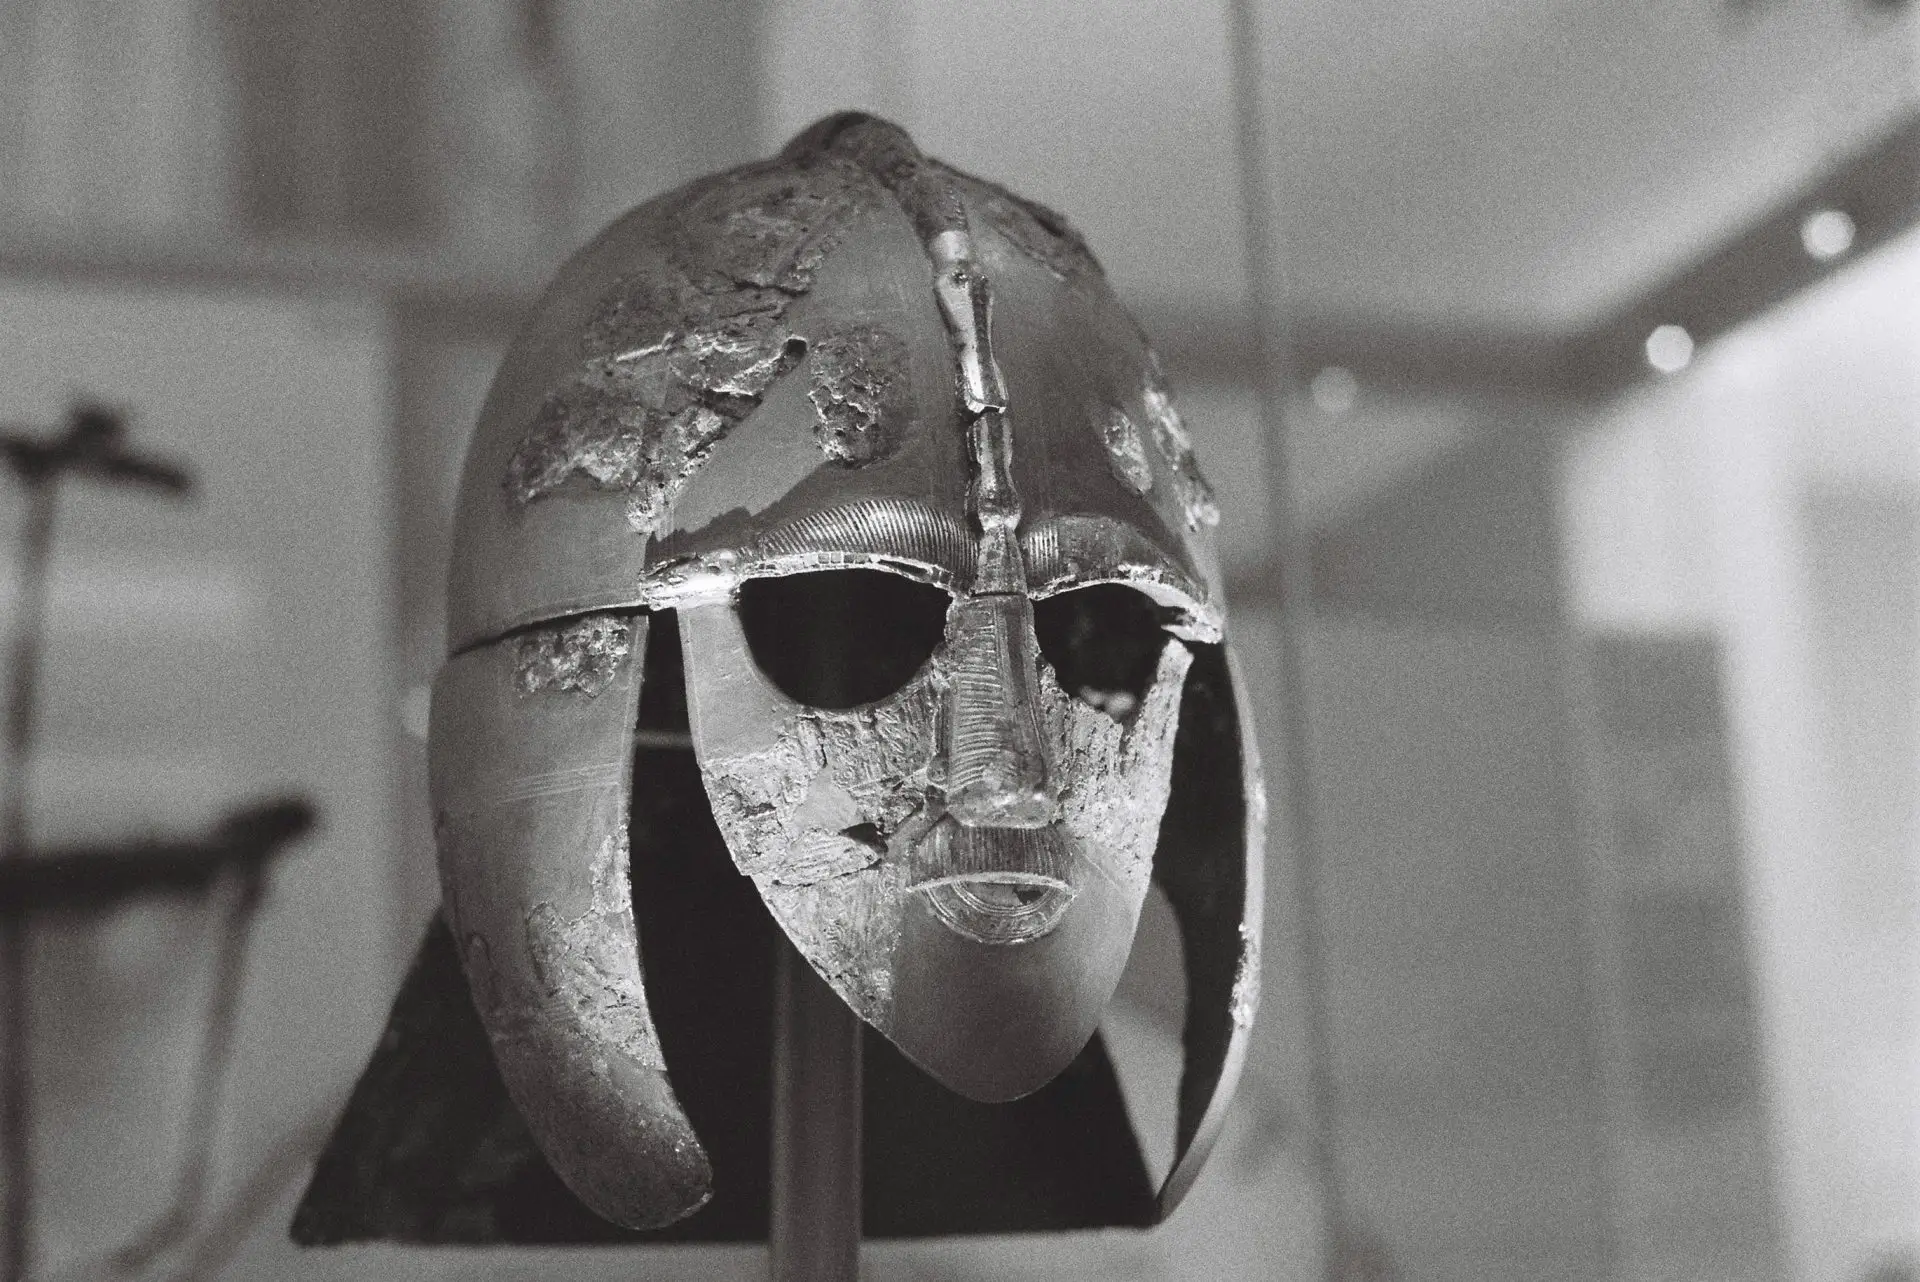 Anglo-saxon face mask and helmet